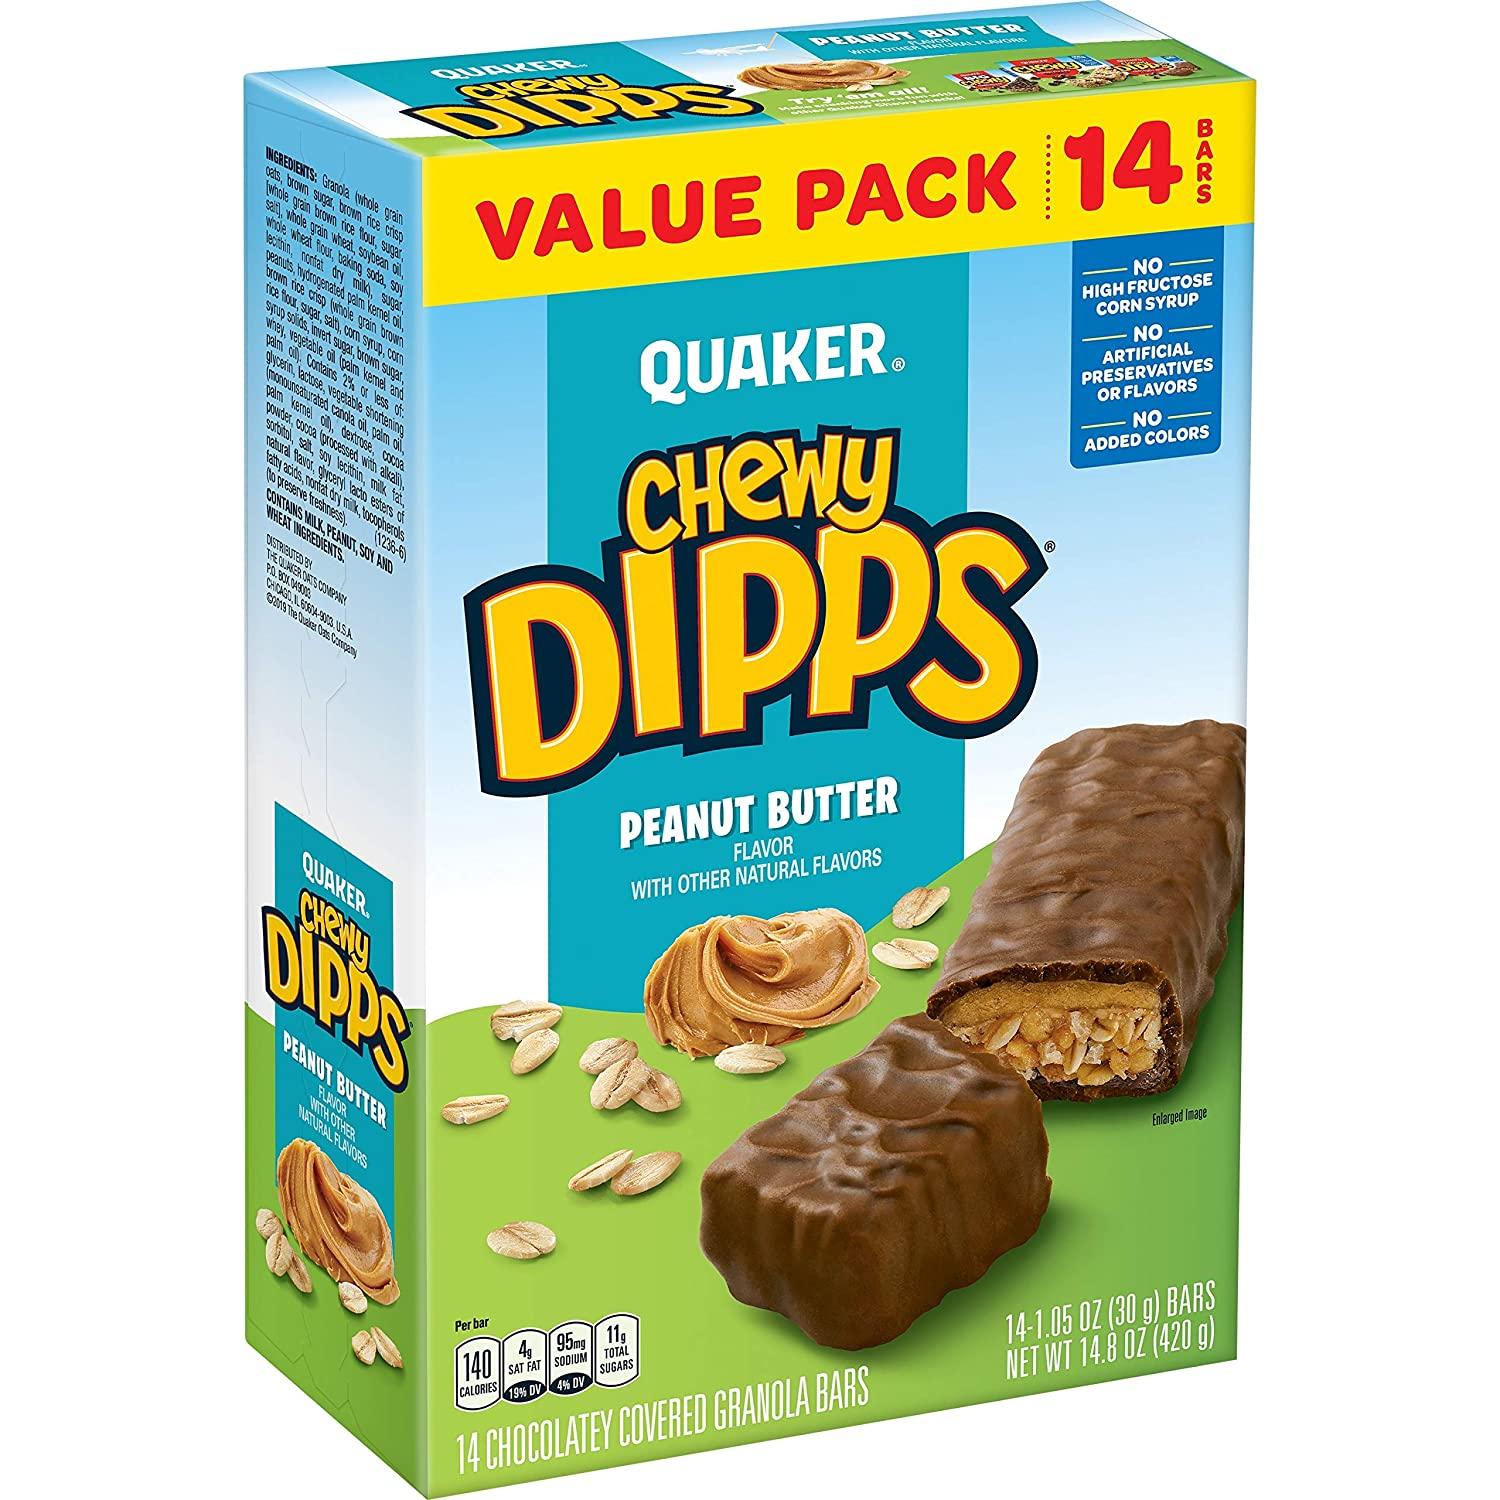 14 Quaker Chewy Dipps Chocolatey Covered Granola Bars for $2.80 Shipped